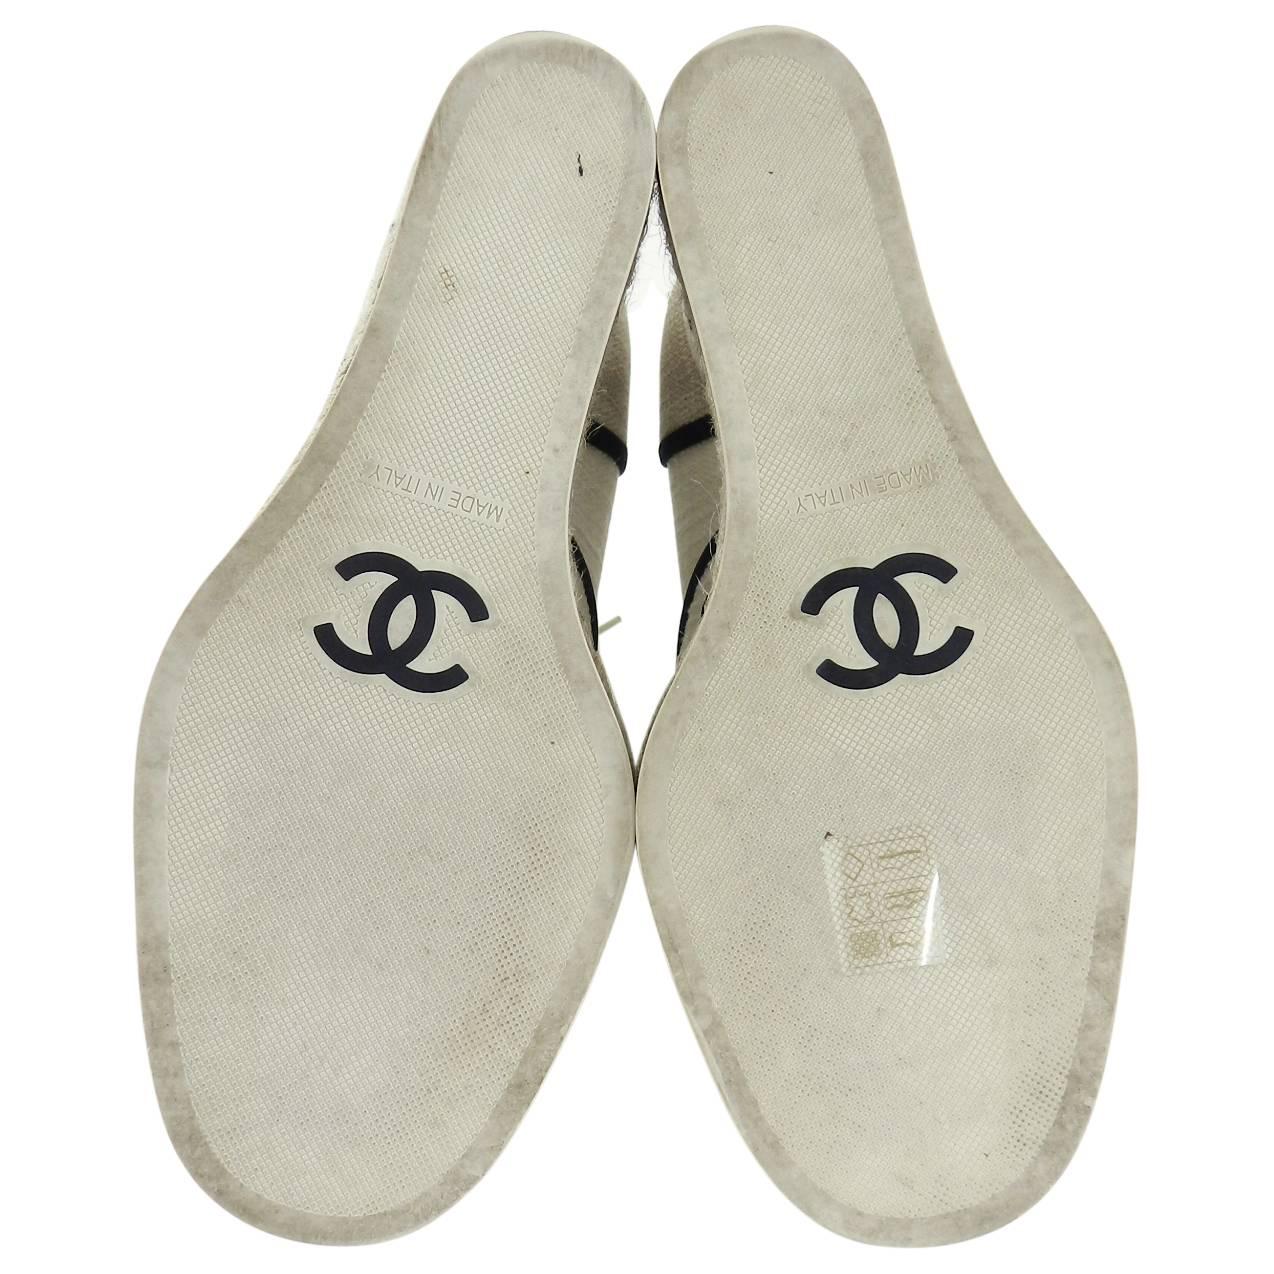 Chanel Ivory and Natural Linen Espadrille Wedge Shoes - 37 5